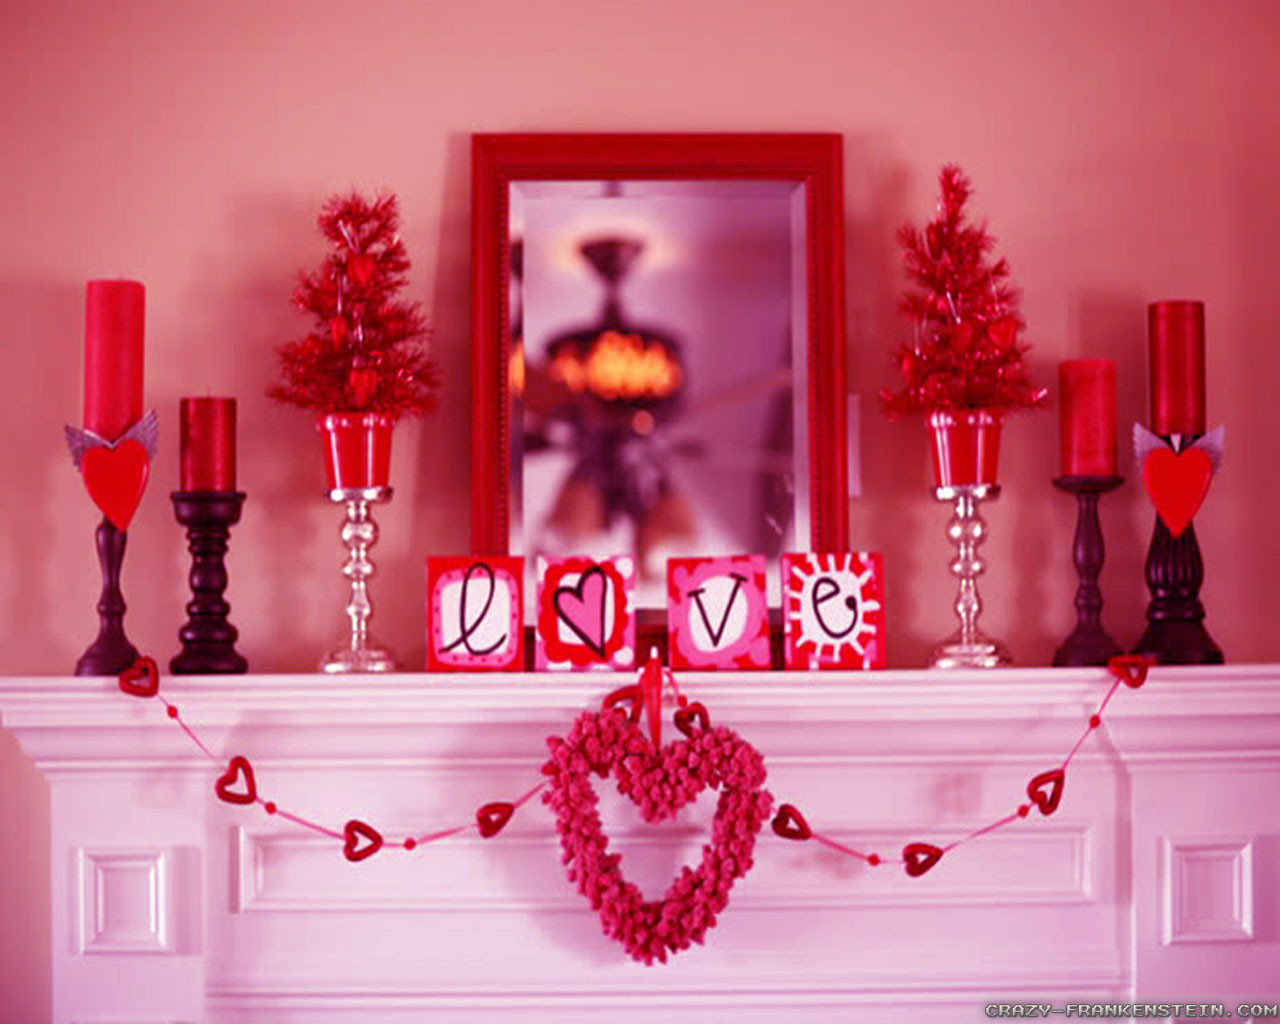 Romantic Decorating Ideas For Valentines Day
 eager hands valentine s day decorating ideas